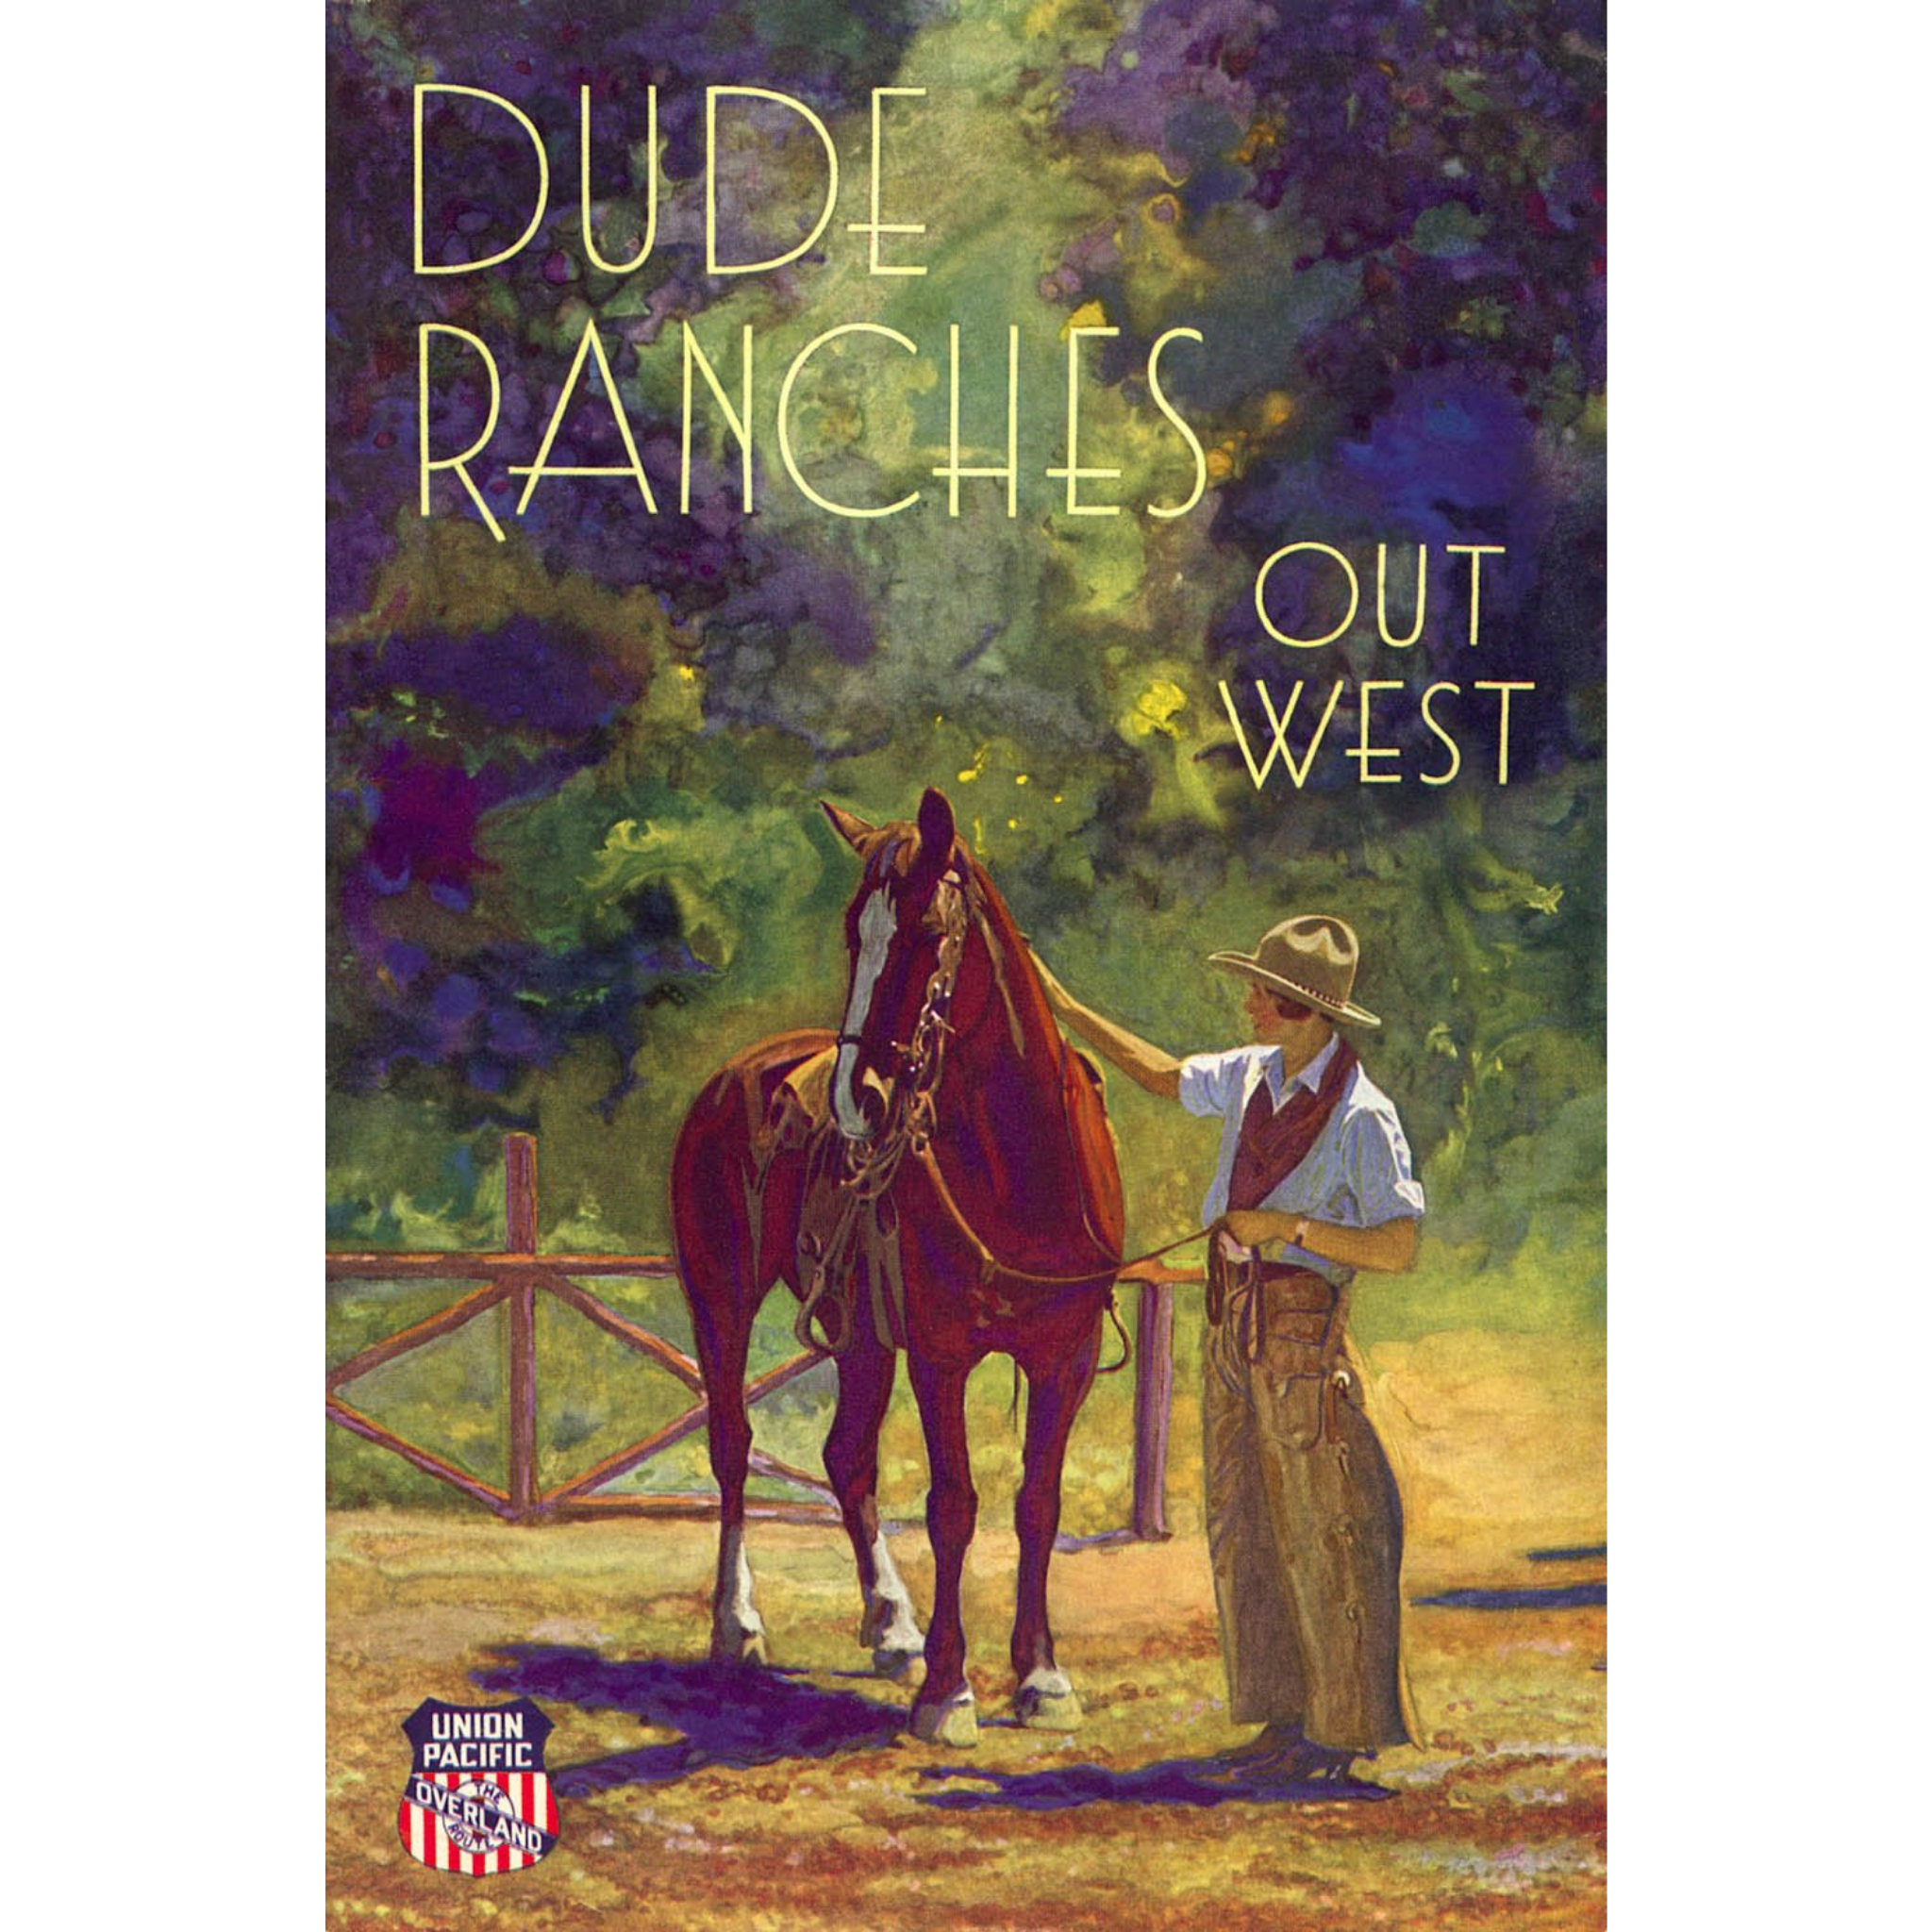 Dude Ranches Out West - ca. 1930 Lithograph